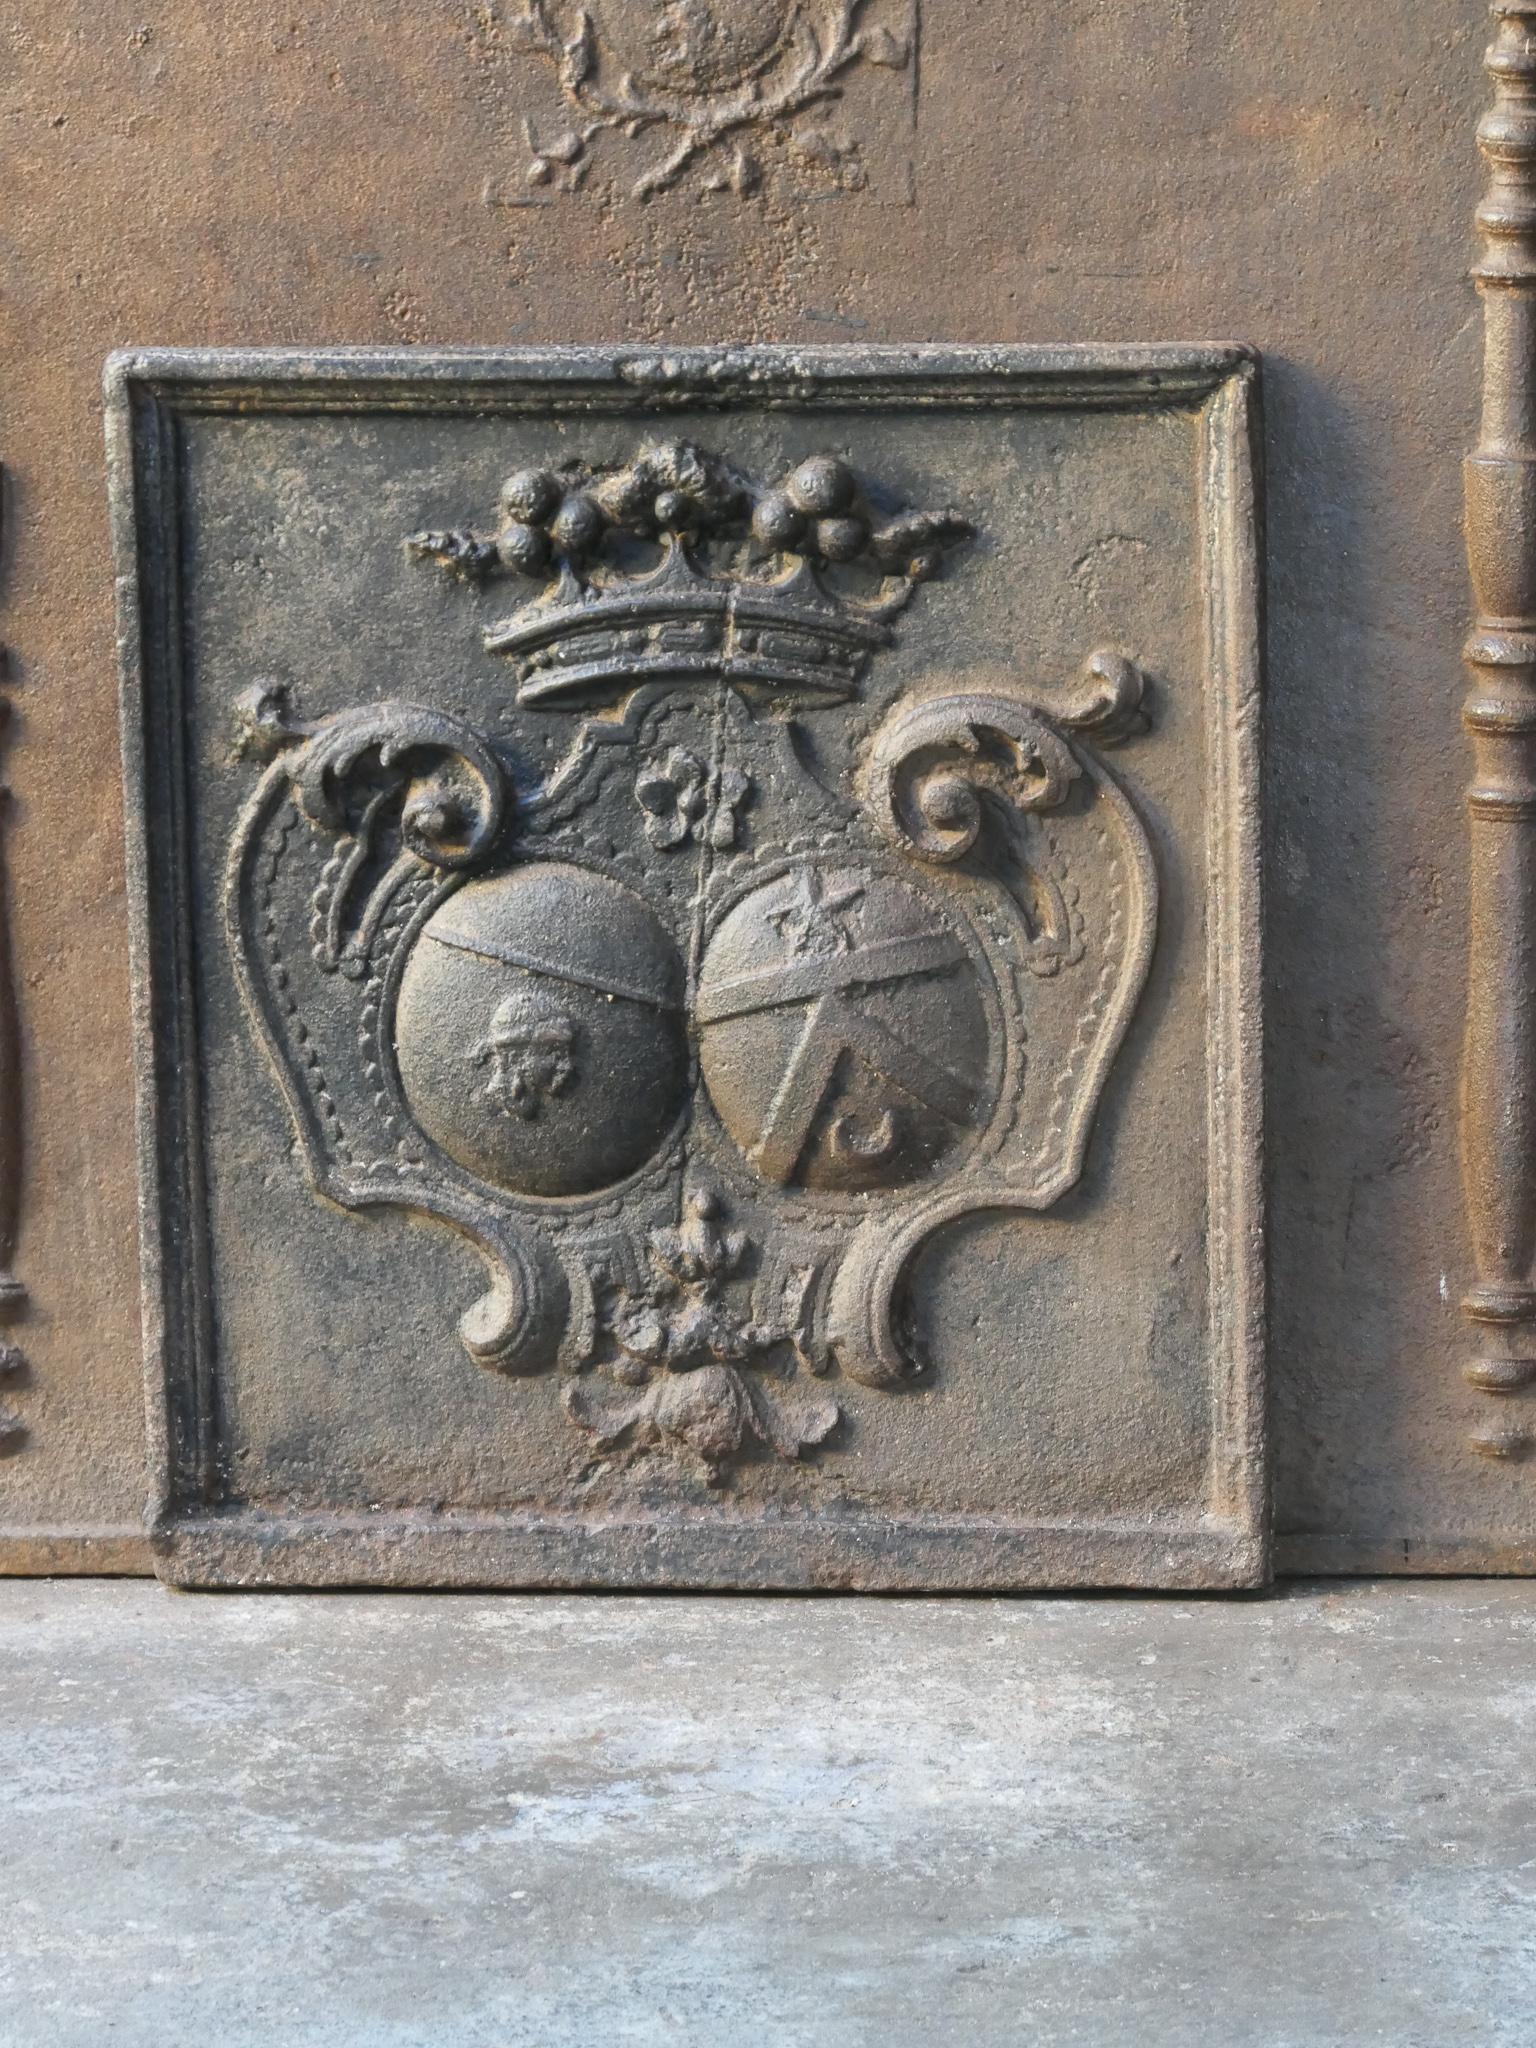 17th century French Louis XIV period fireback with an unknown coat of arms.

The fireback is made of cast iron and has a natural brown patina. Upon request it can be made black / pewter. It is in a good condition and does not have